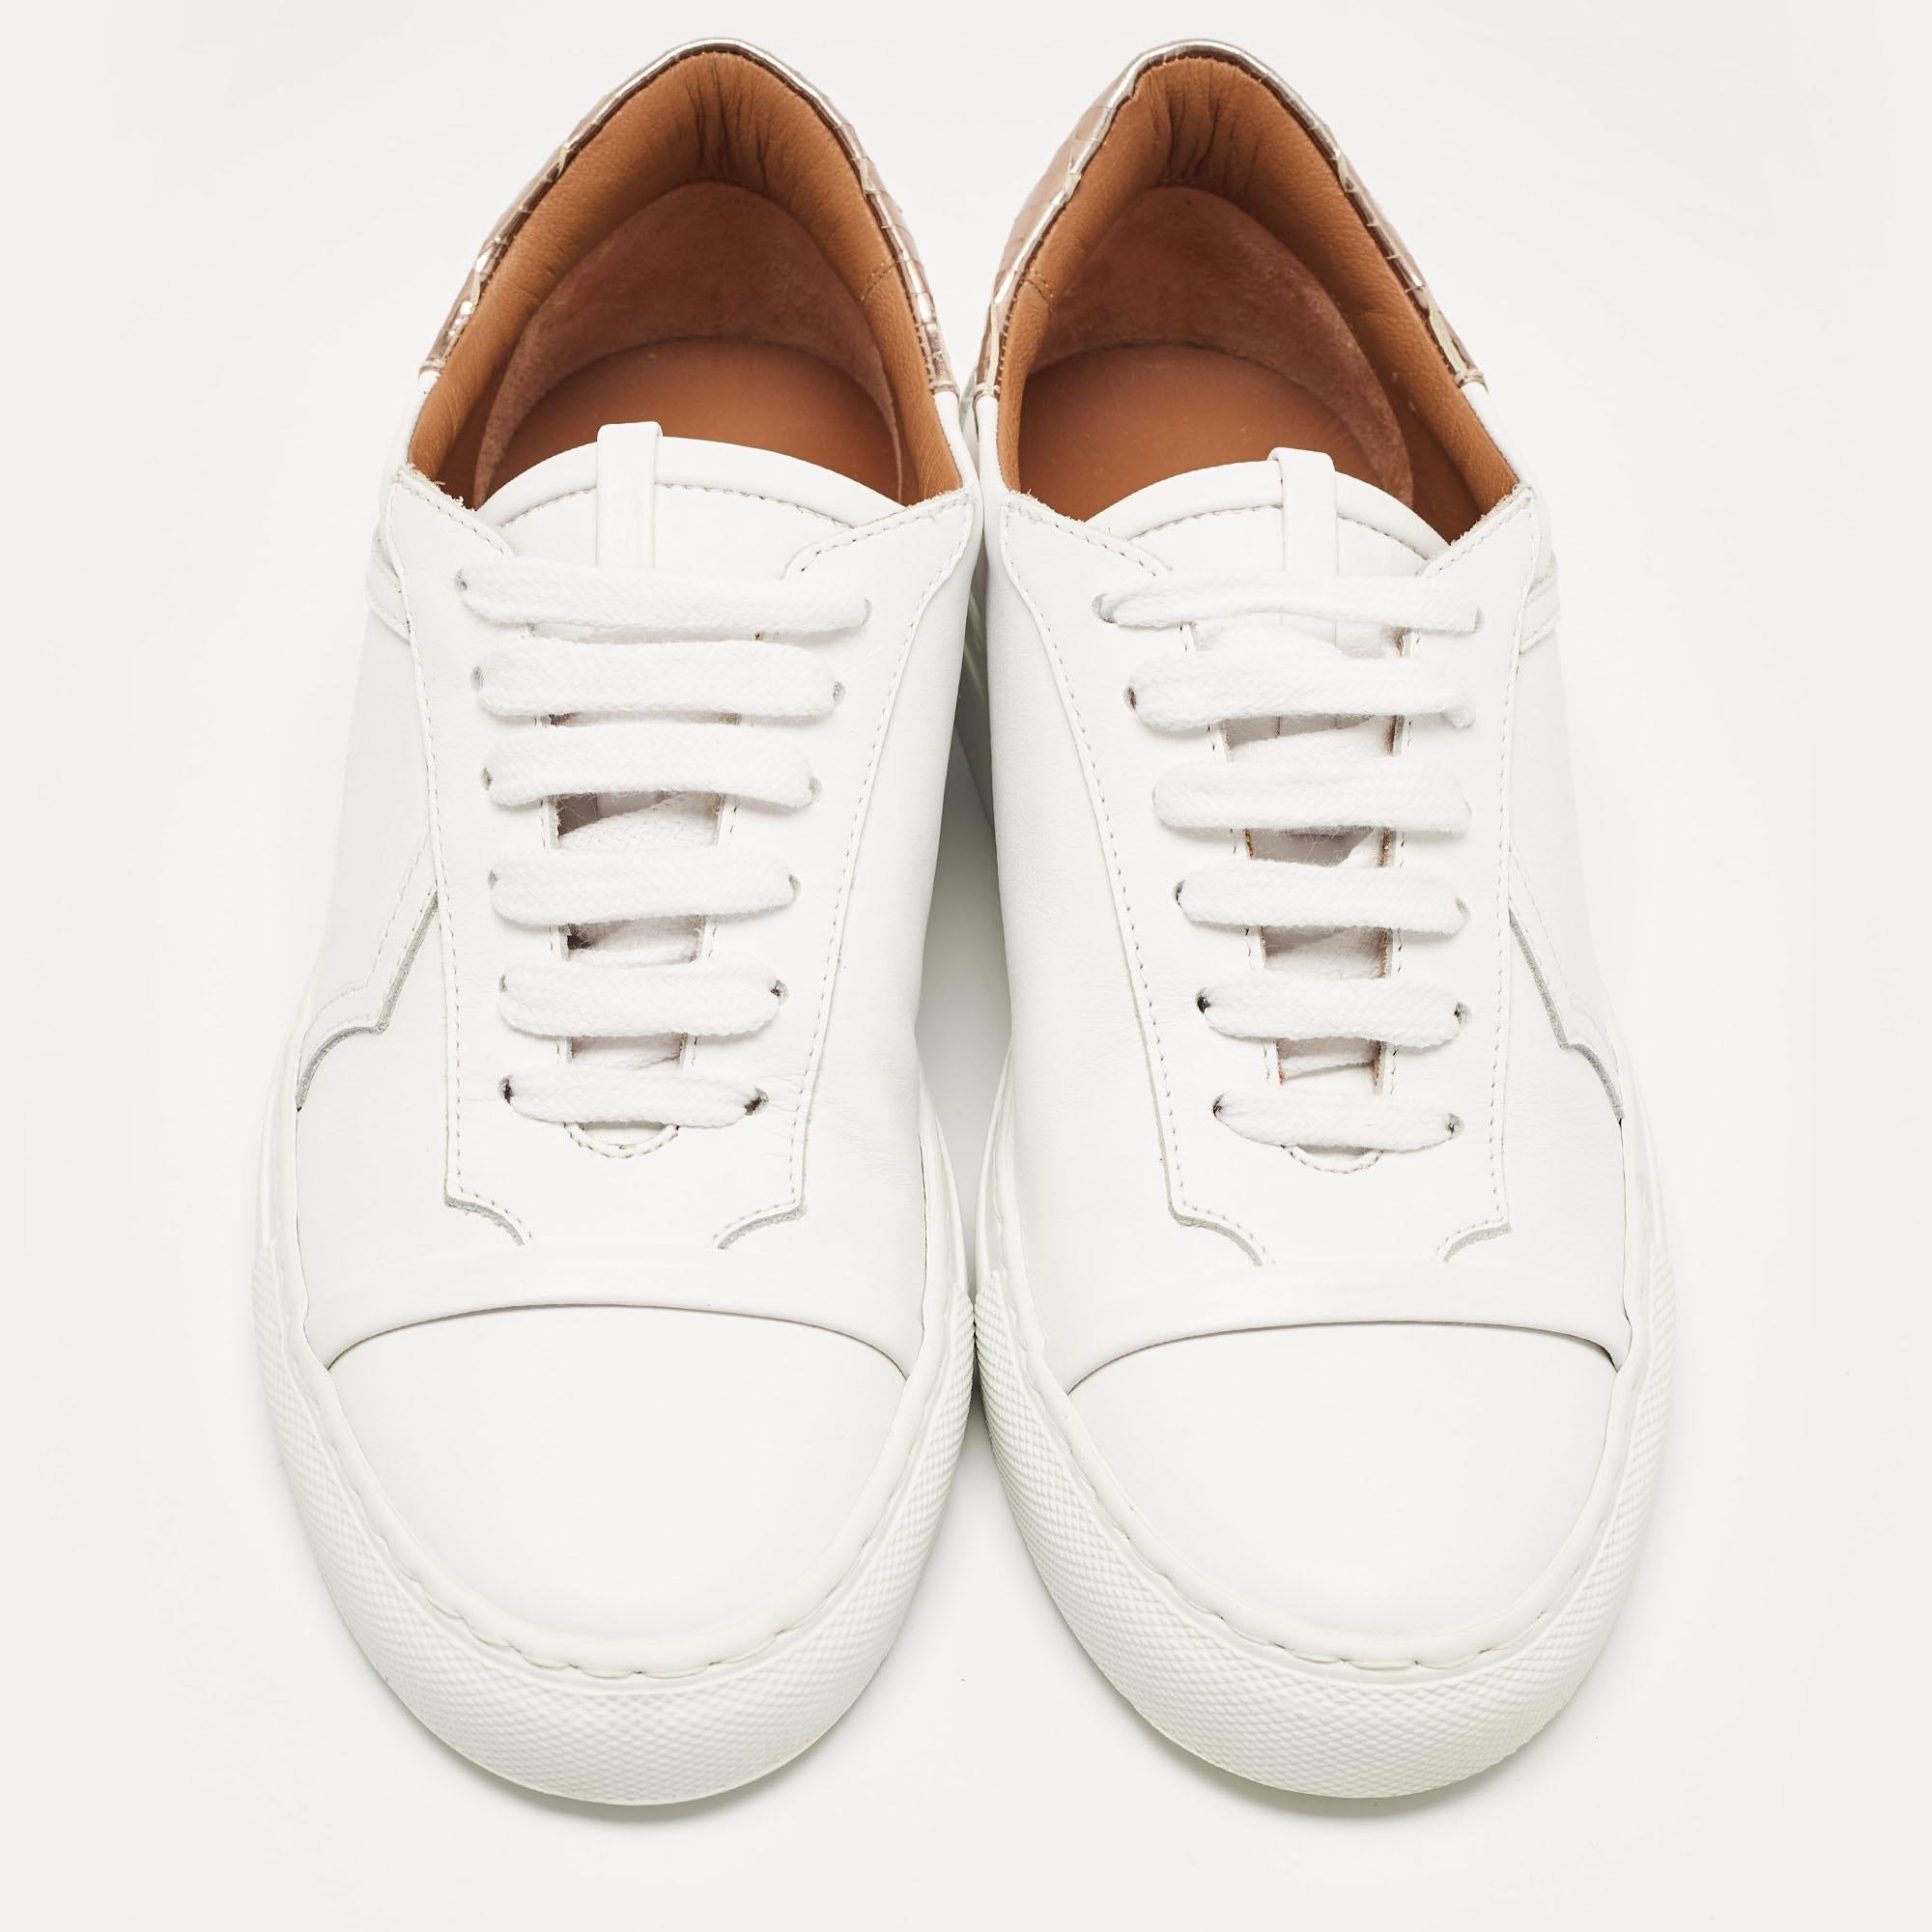 Coming in a classic silhouette, these Malone Souliers white sneakers are a seamless combination of luxury, comfort, and style. These sneakers are designed with signature details and comfortable insoles.

Includes: Original Dustbag, Original Box,